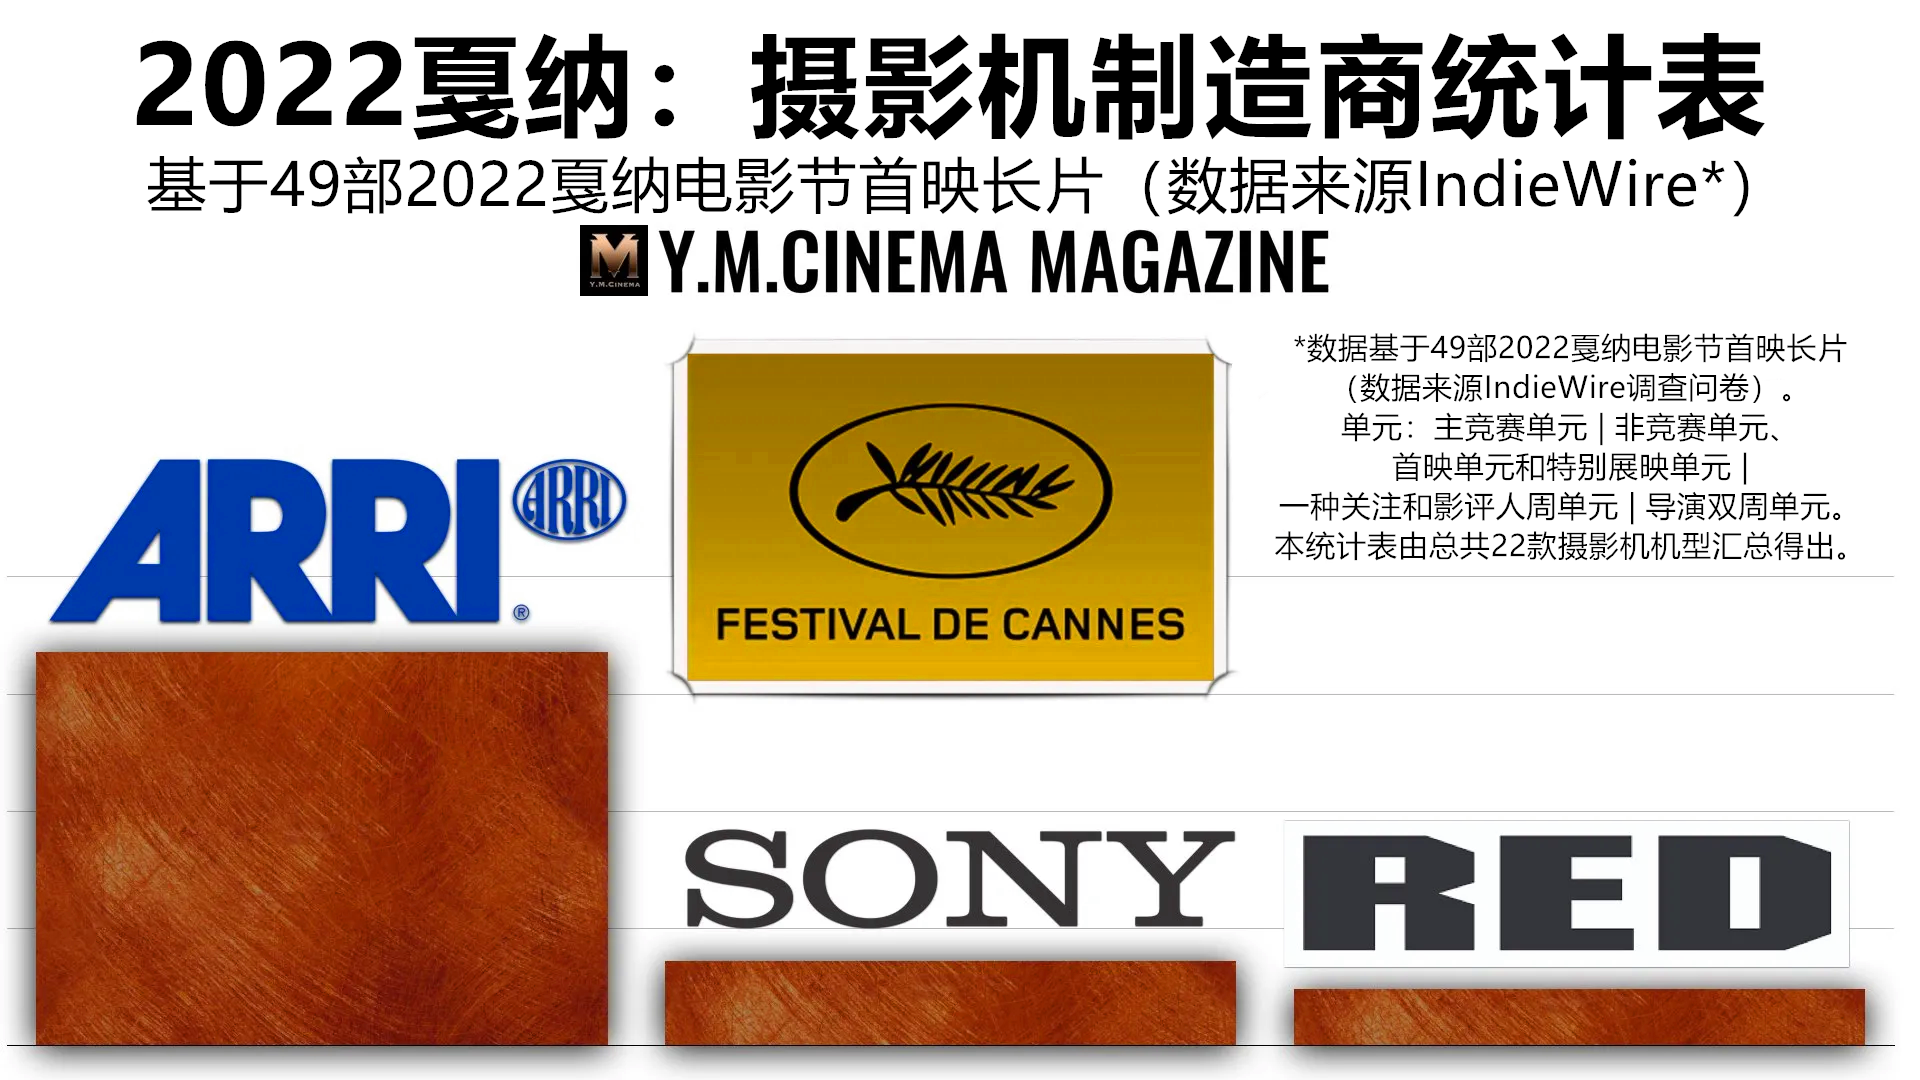 Cannes-2022-Camera-Manufacturers-Chart.002_副本_副本